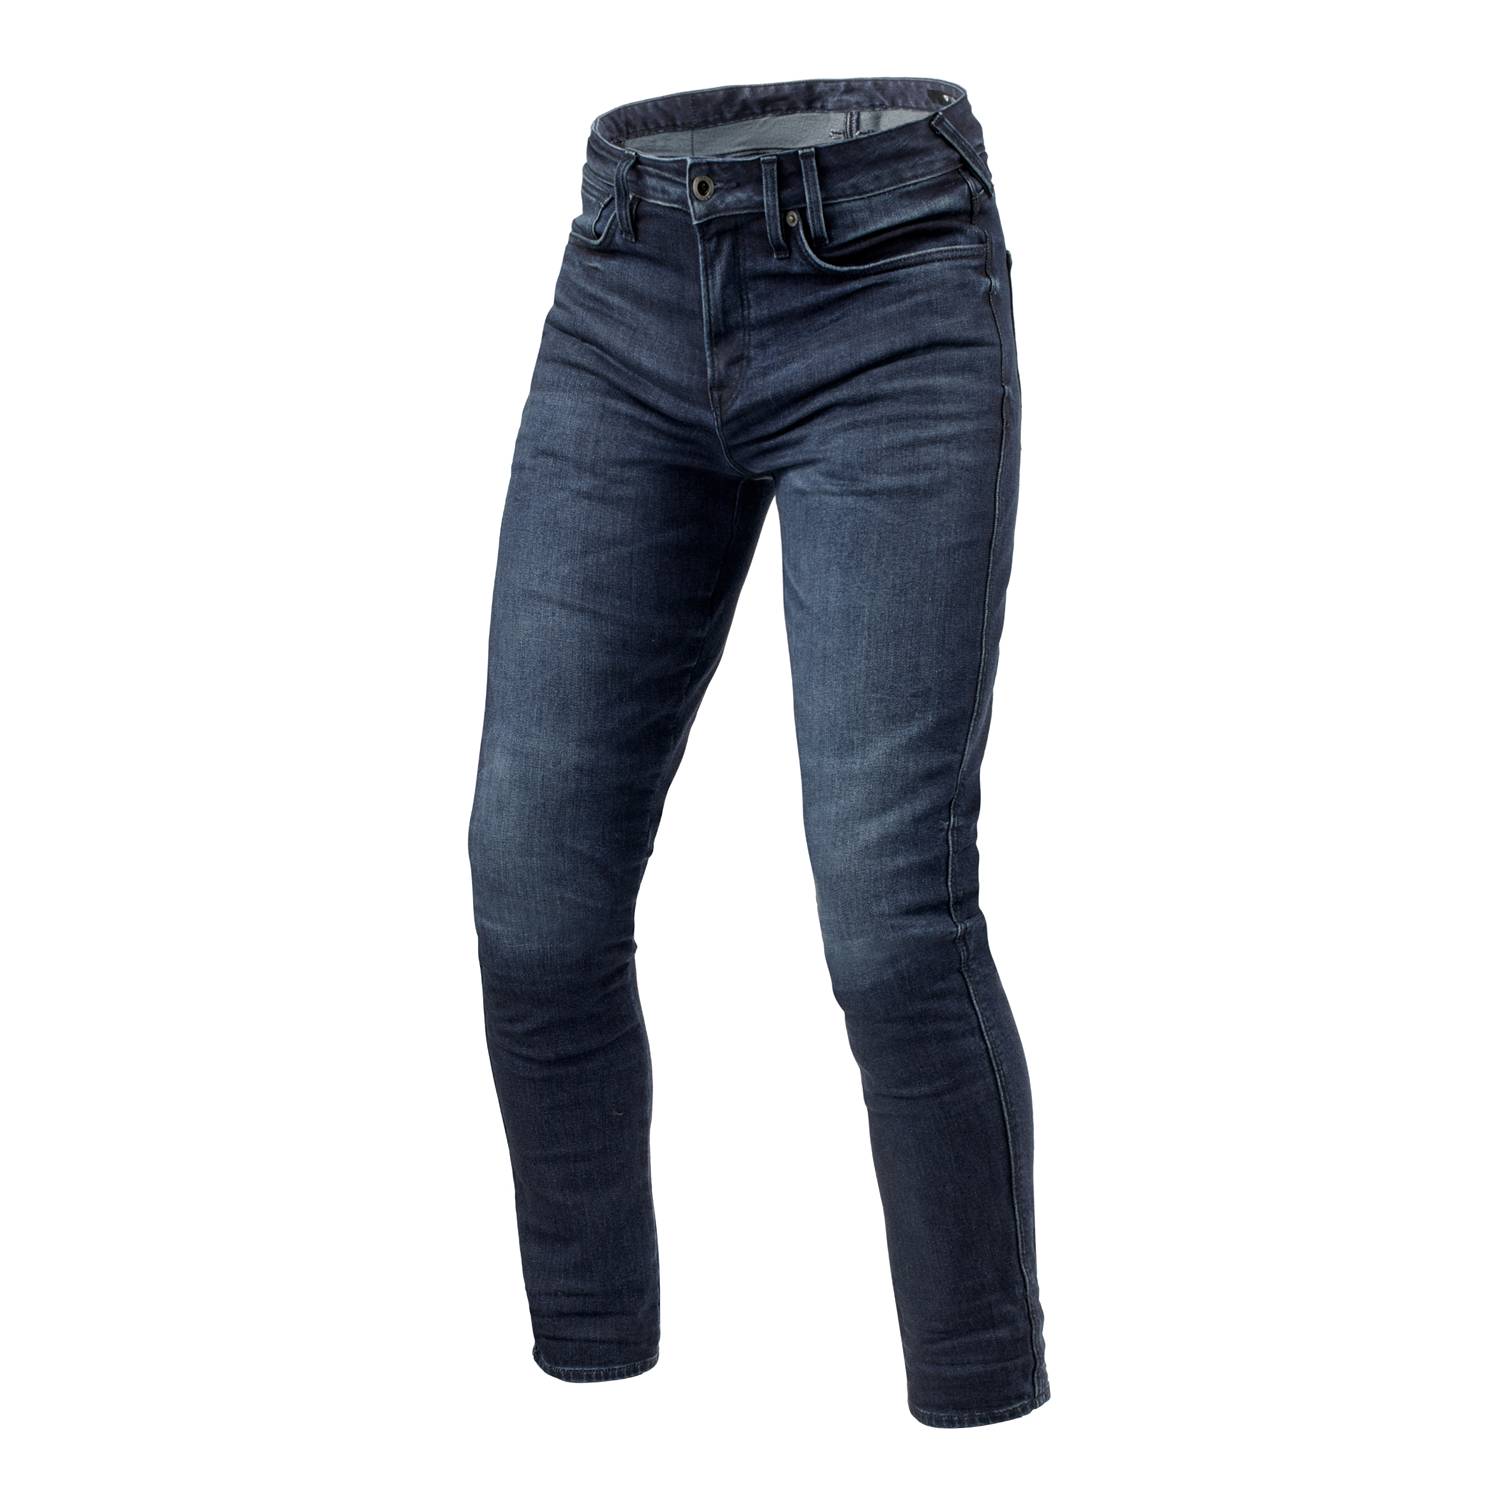 Image of REV'IT! Jeans Carlin SK Dark Blue Used L32 Motorcycle Jeans Taille L32/W30